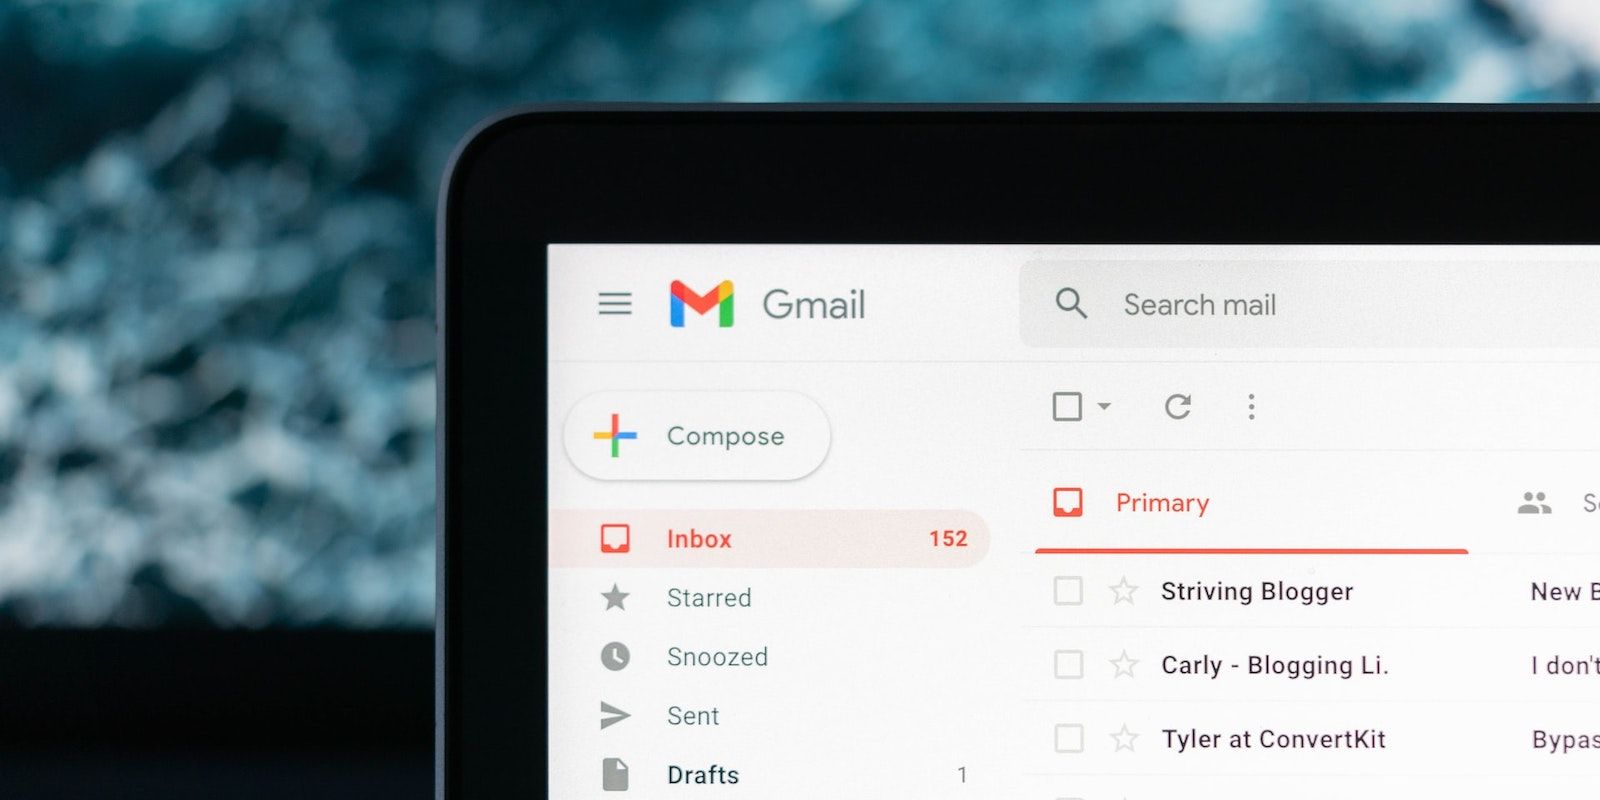 The home page of the Gmail website with some emails